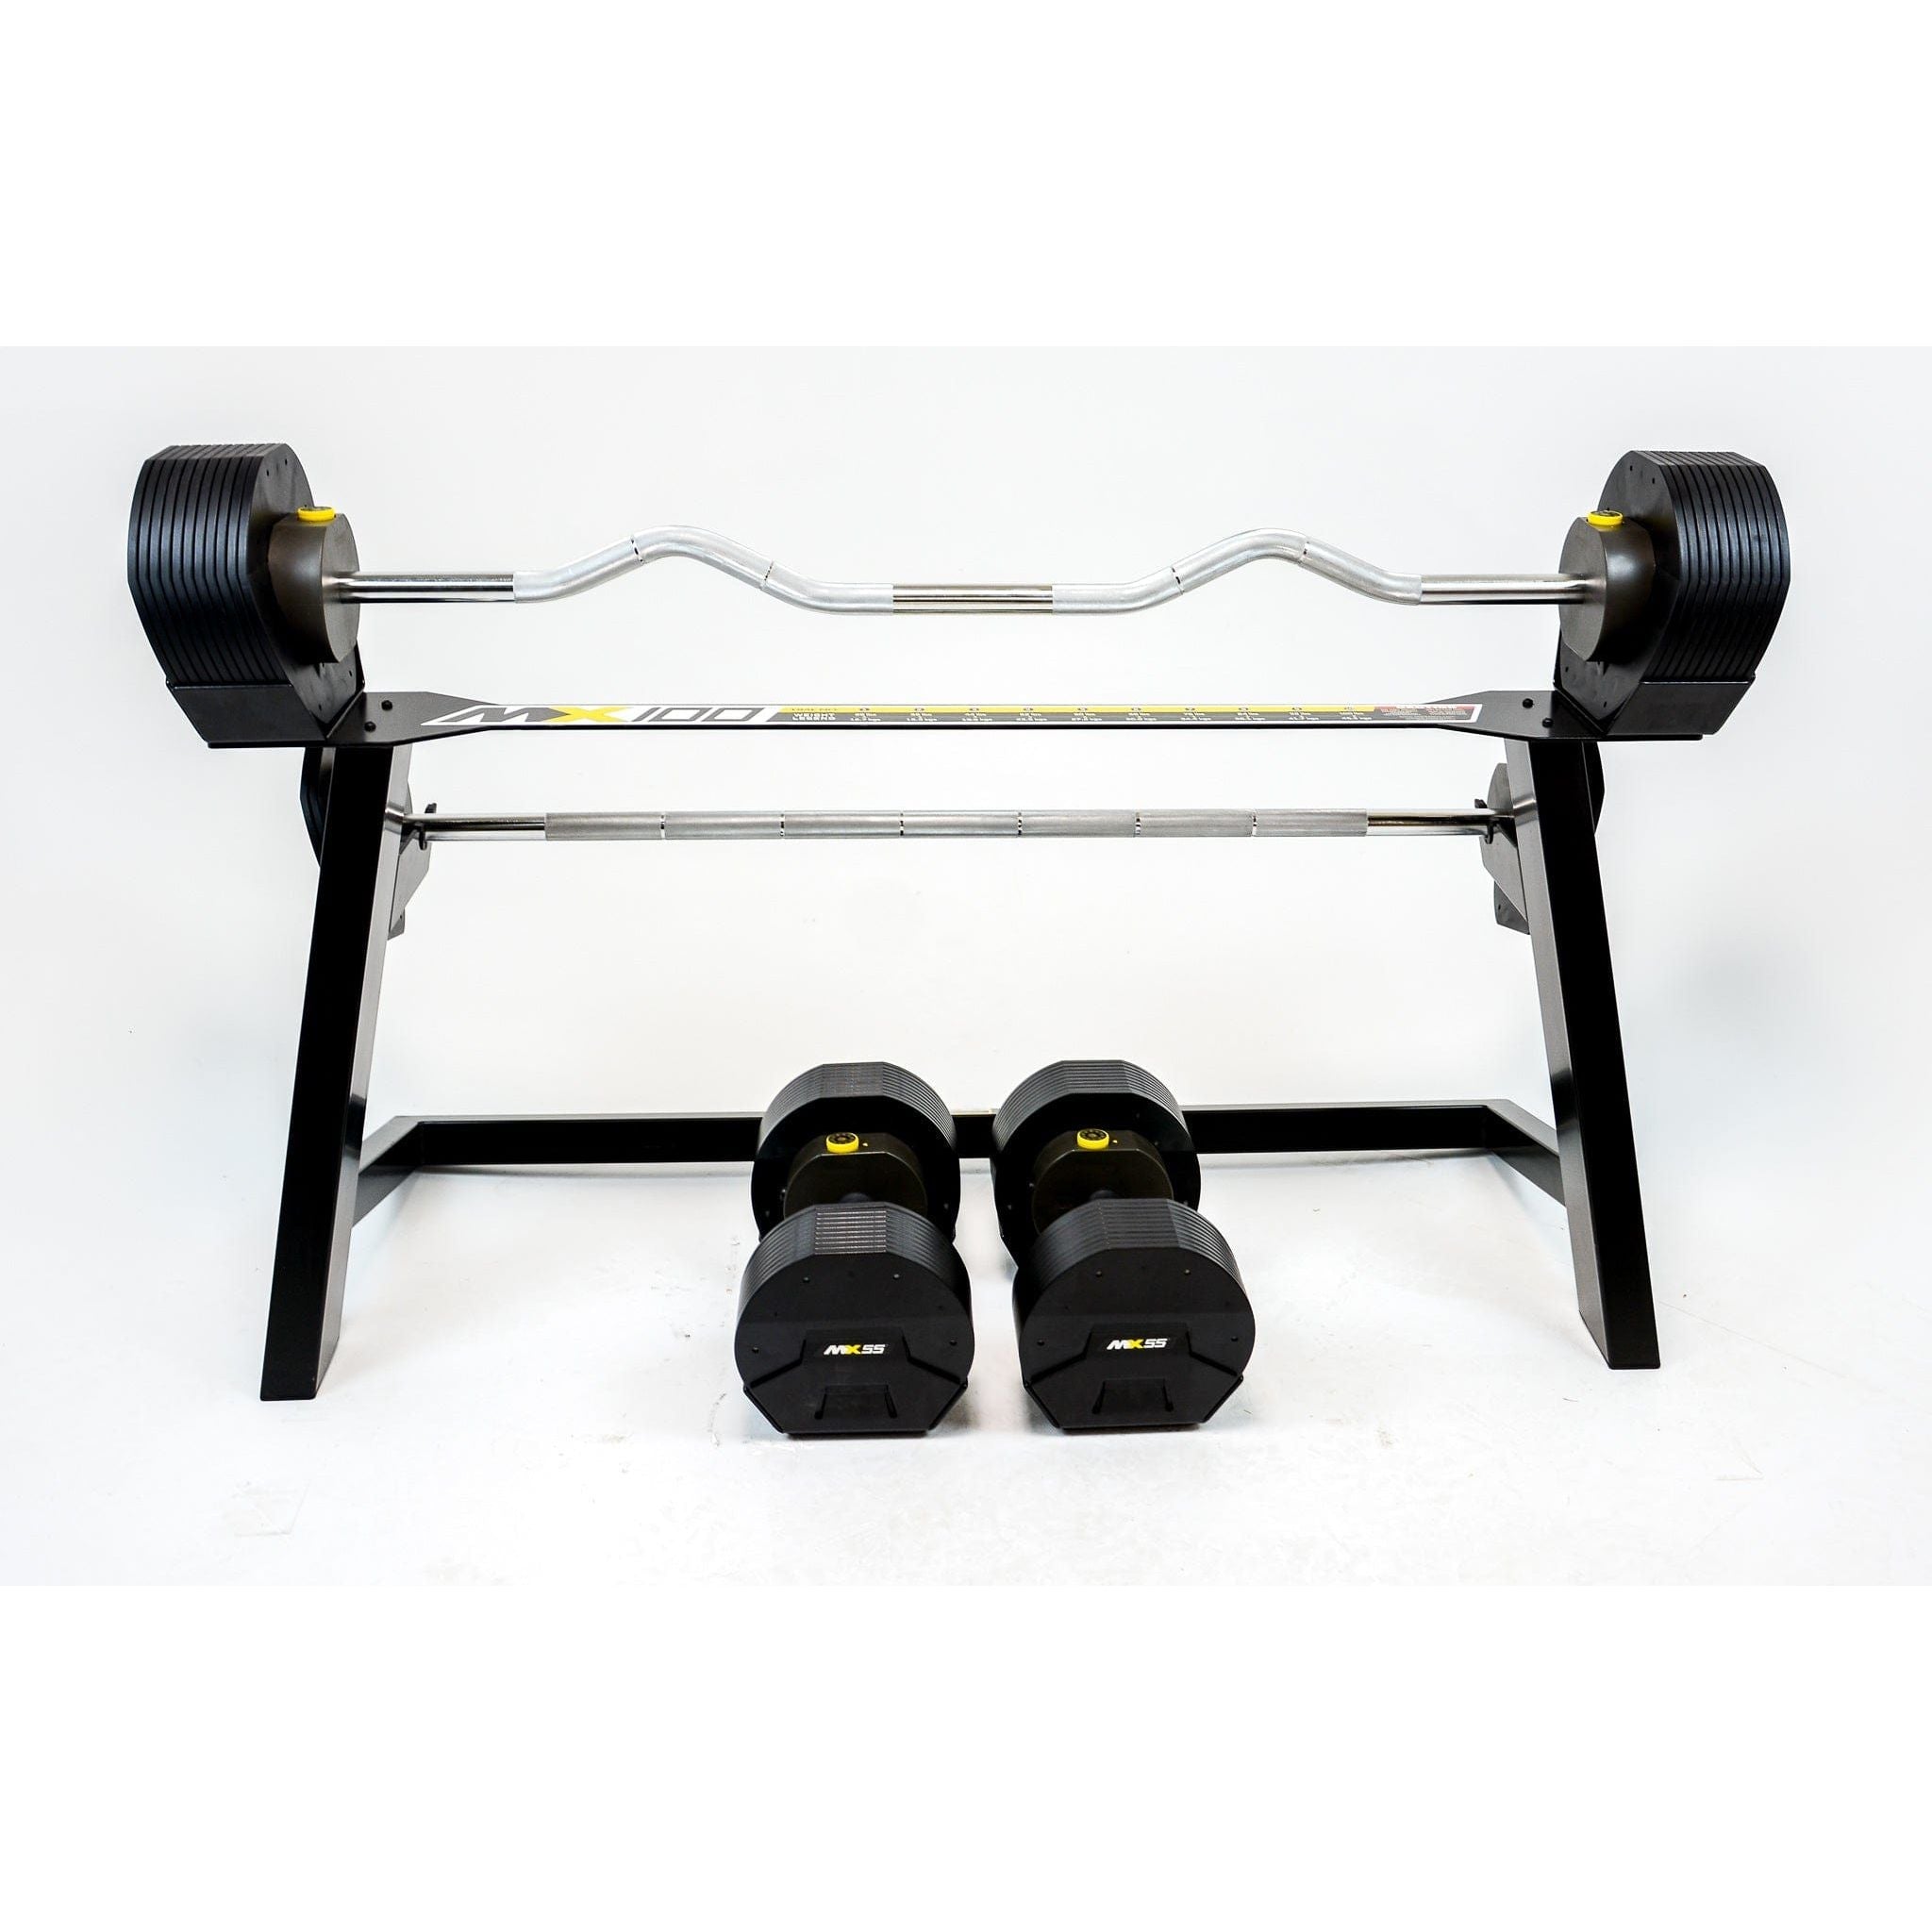 MX100 Rapid Change Adjustable Barbell / Curl Bar System (28 lbs to 100 lbs)